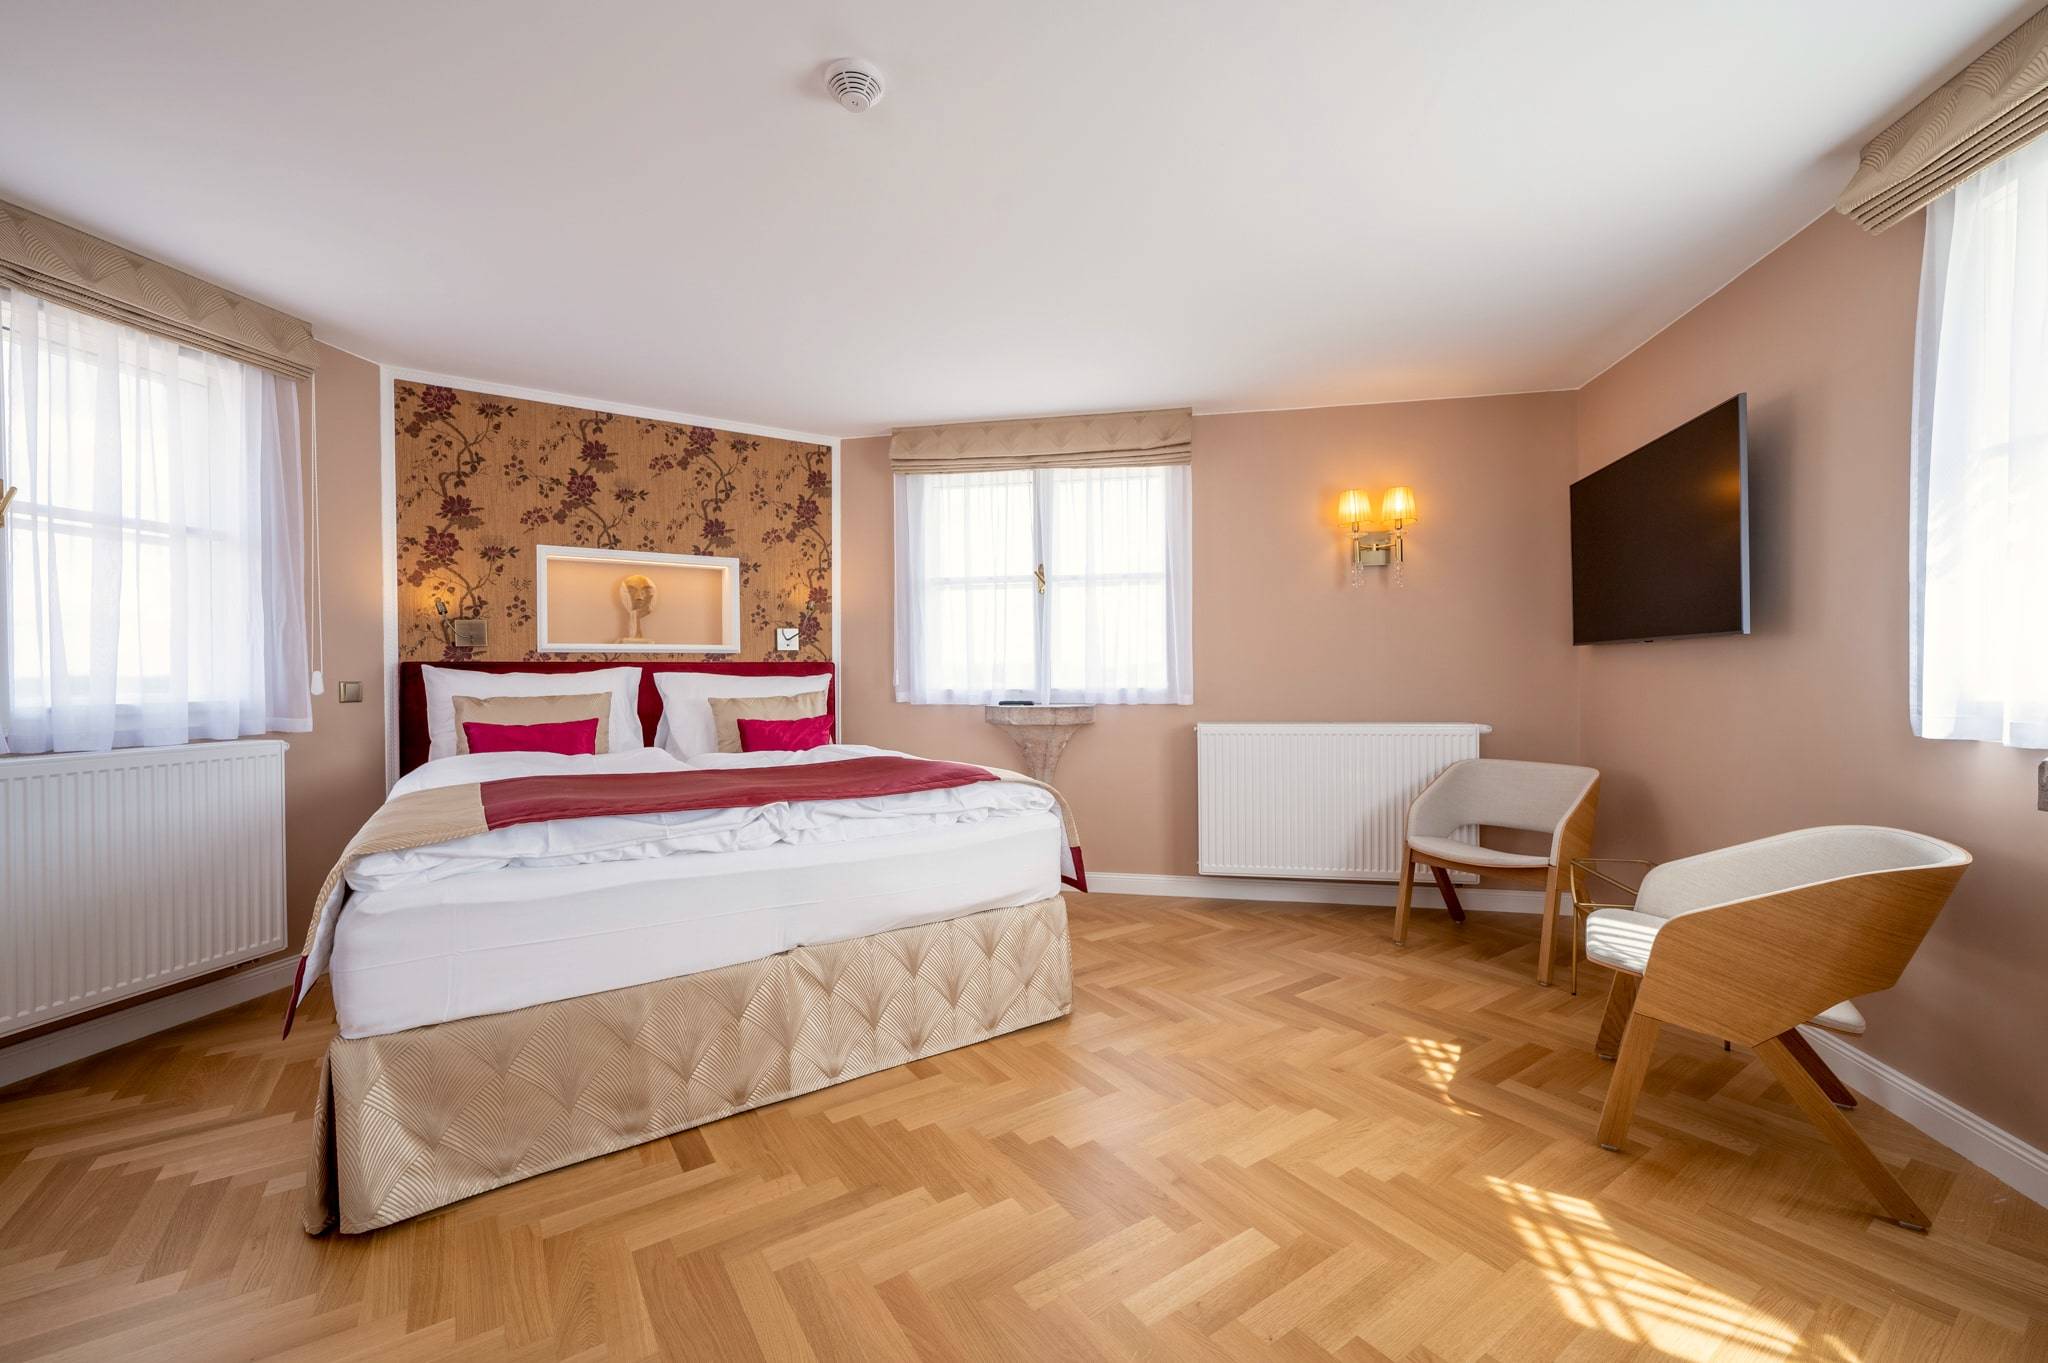 Tower Suite - Two-Bedroom Suite - Hotel Chateau Trnova near Prague